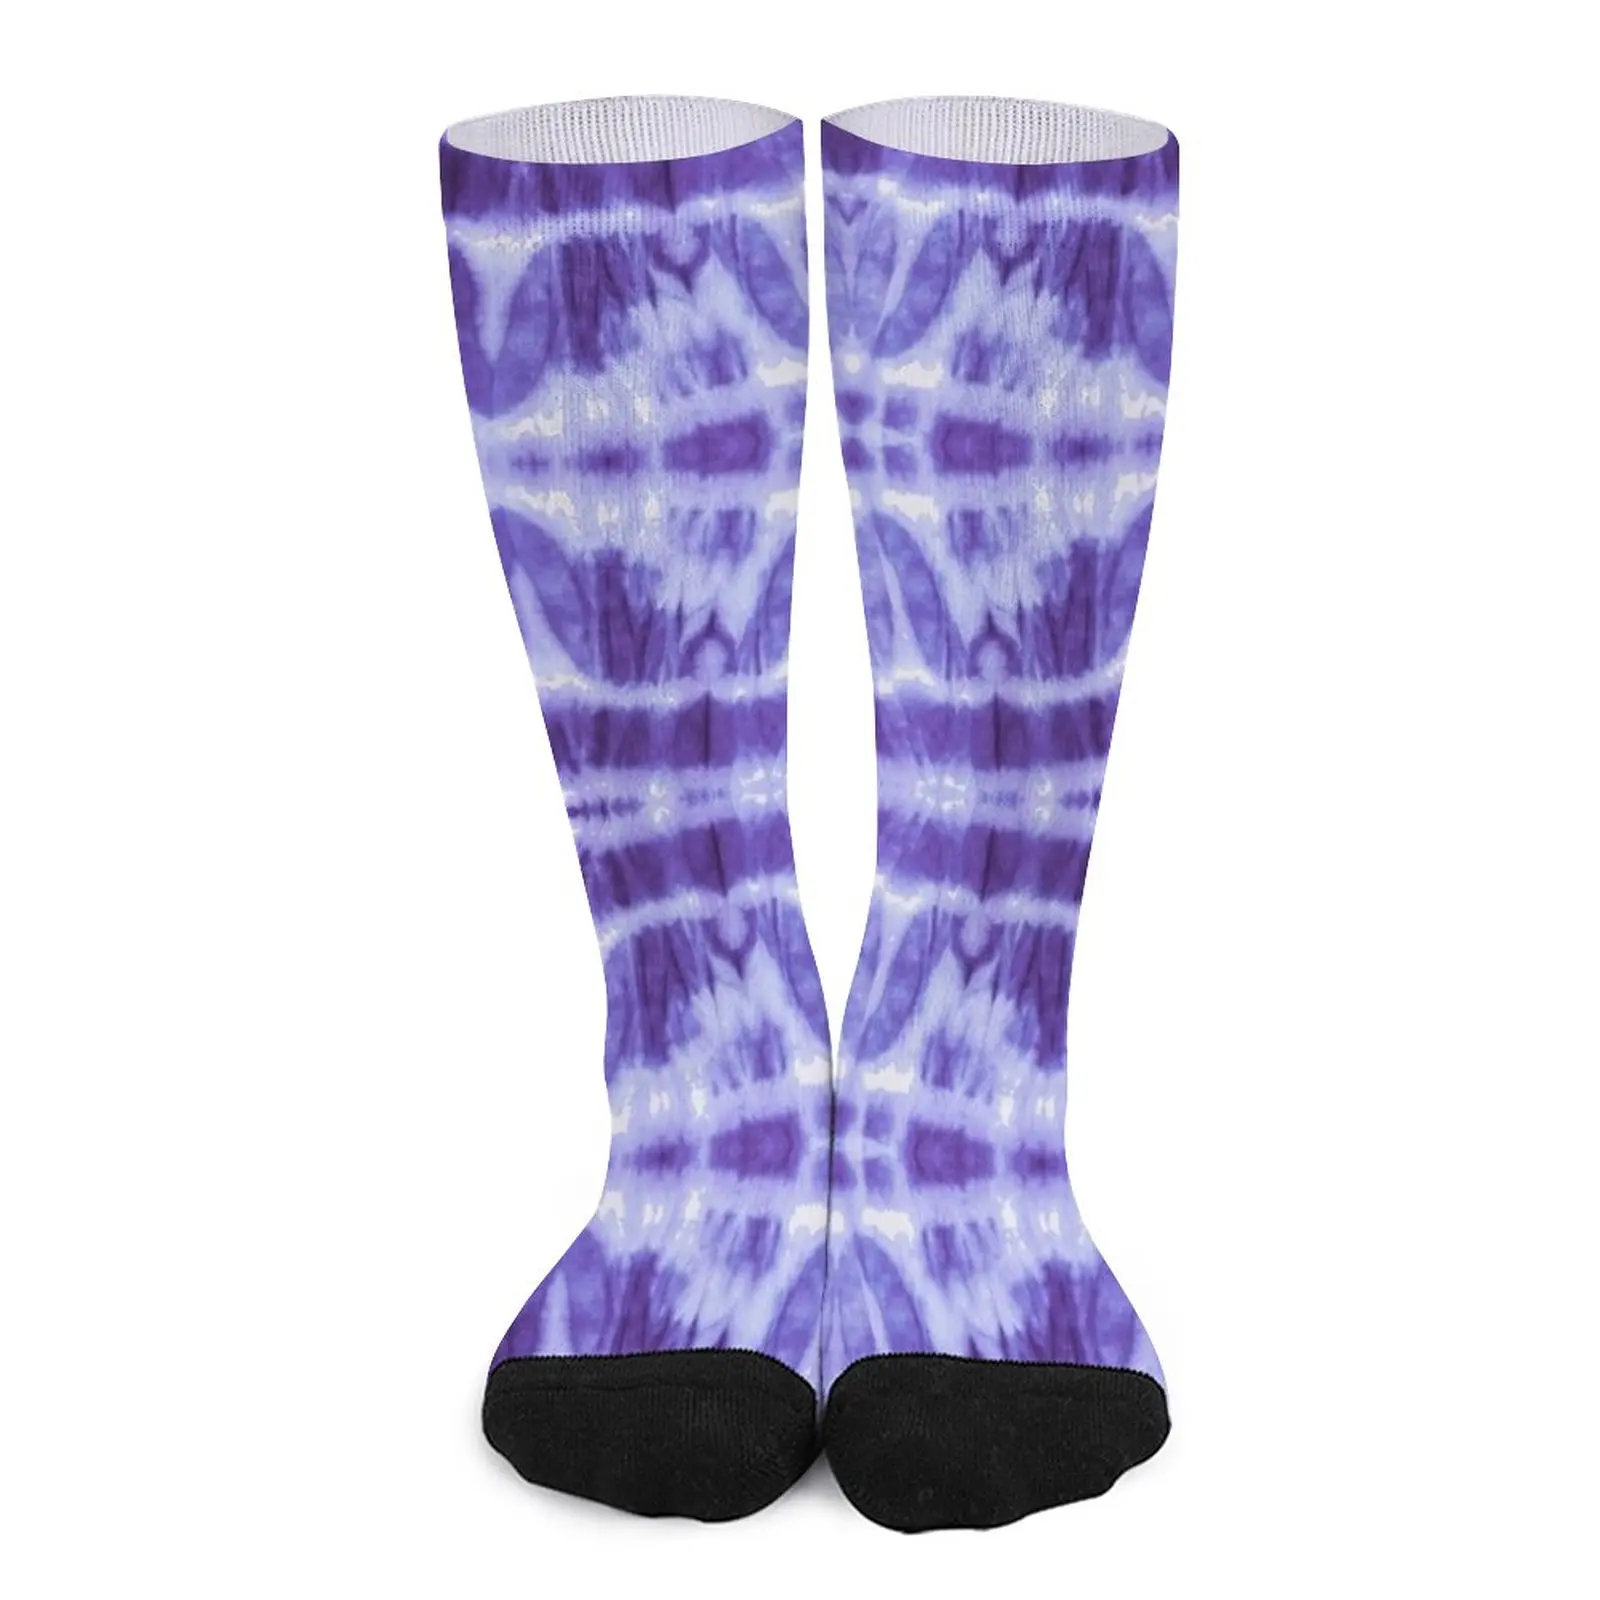 Tie Dye Violet Twos Socks Male sock golf Stockings compression socks ladies professional 2 in 1 nose hair trimmer washable portable electric shaver ladies male eyebrow trimmer for facial beard face care